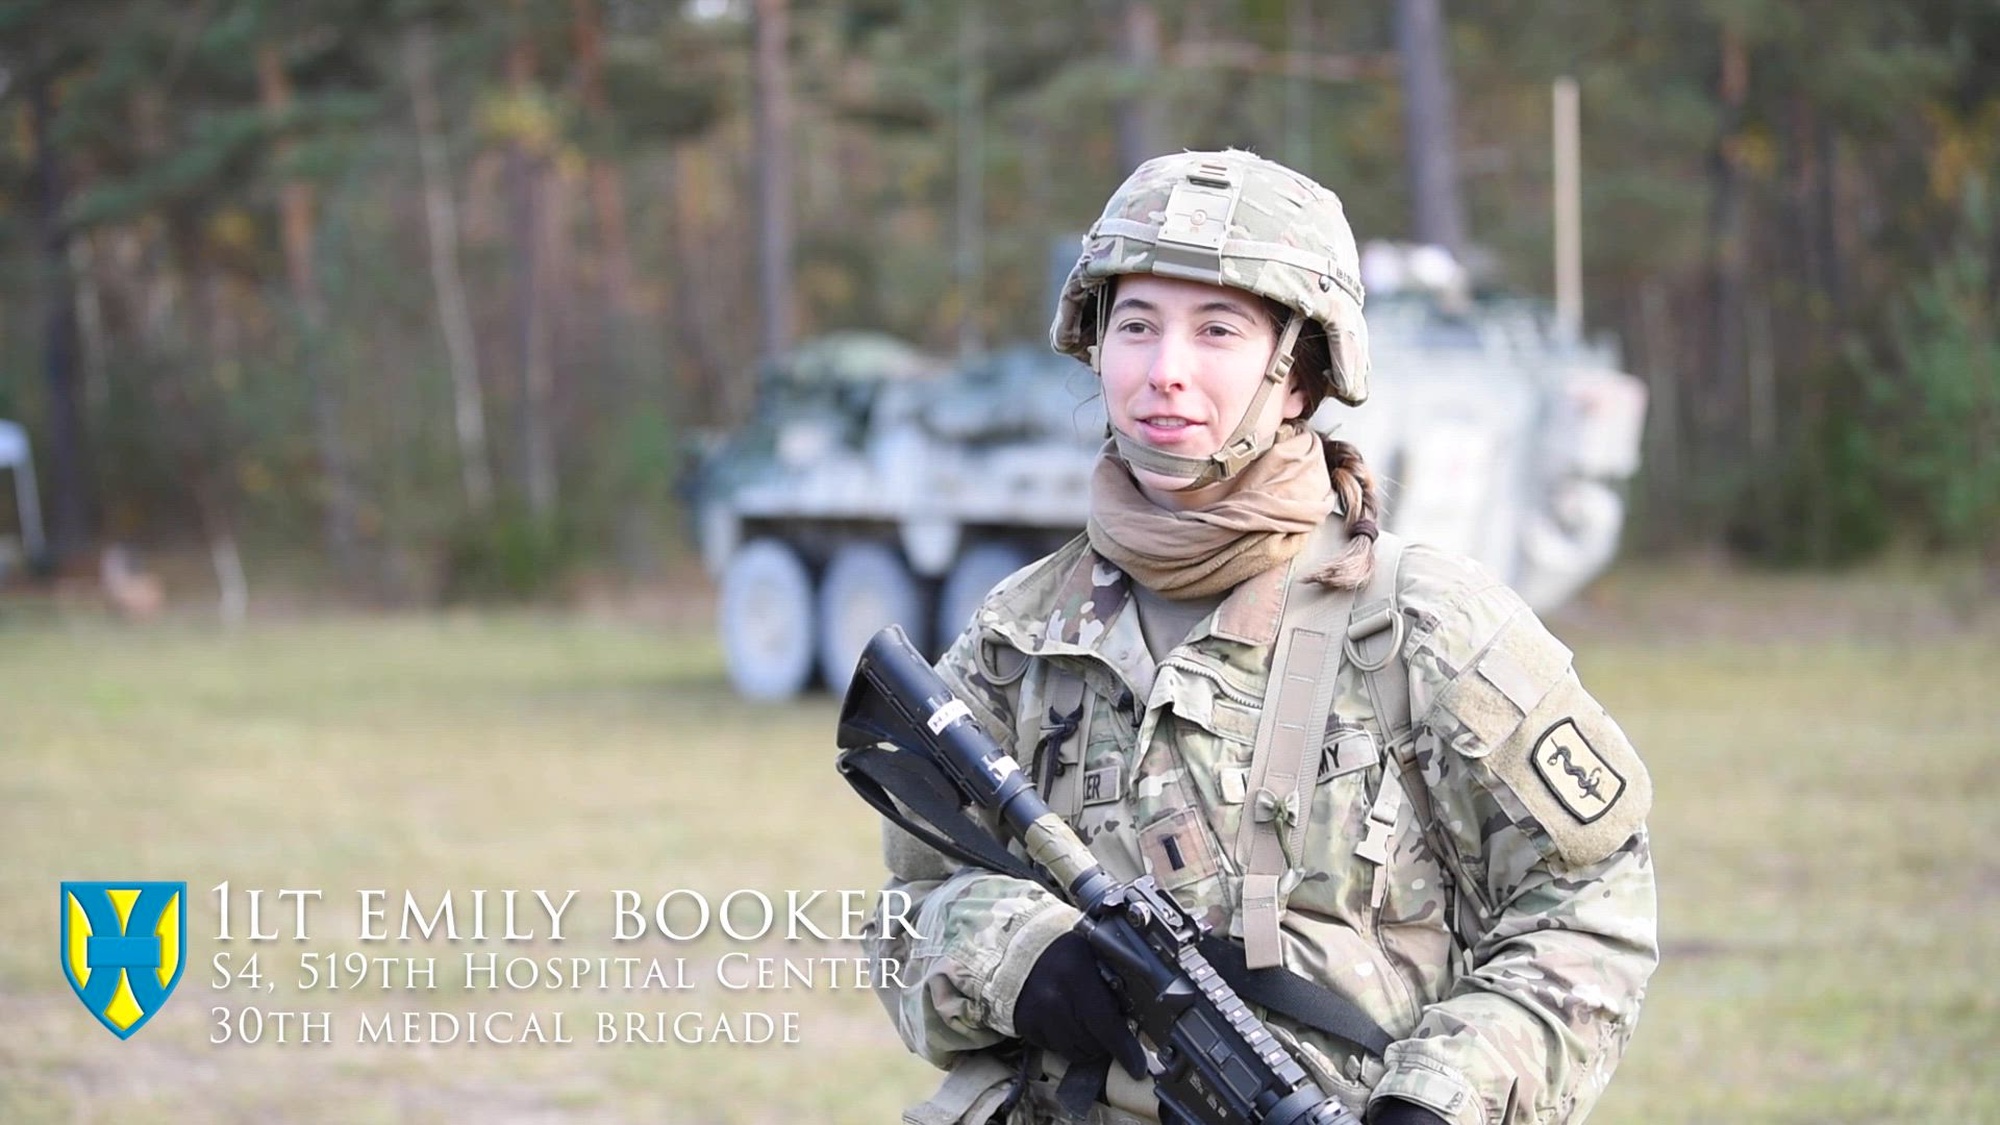 U.S. Army 1st Lt. Emily Booker, 30th Medical Brigade, and why she serves.